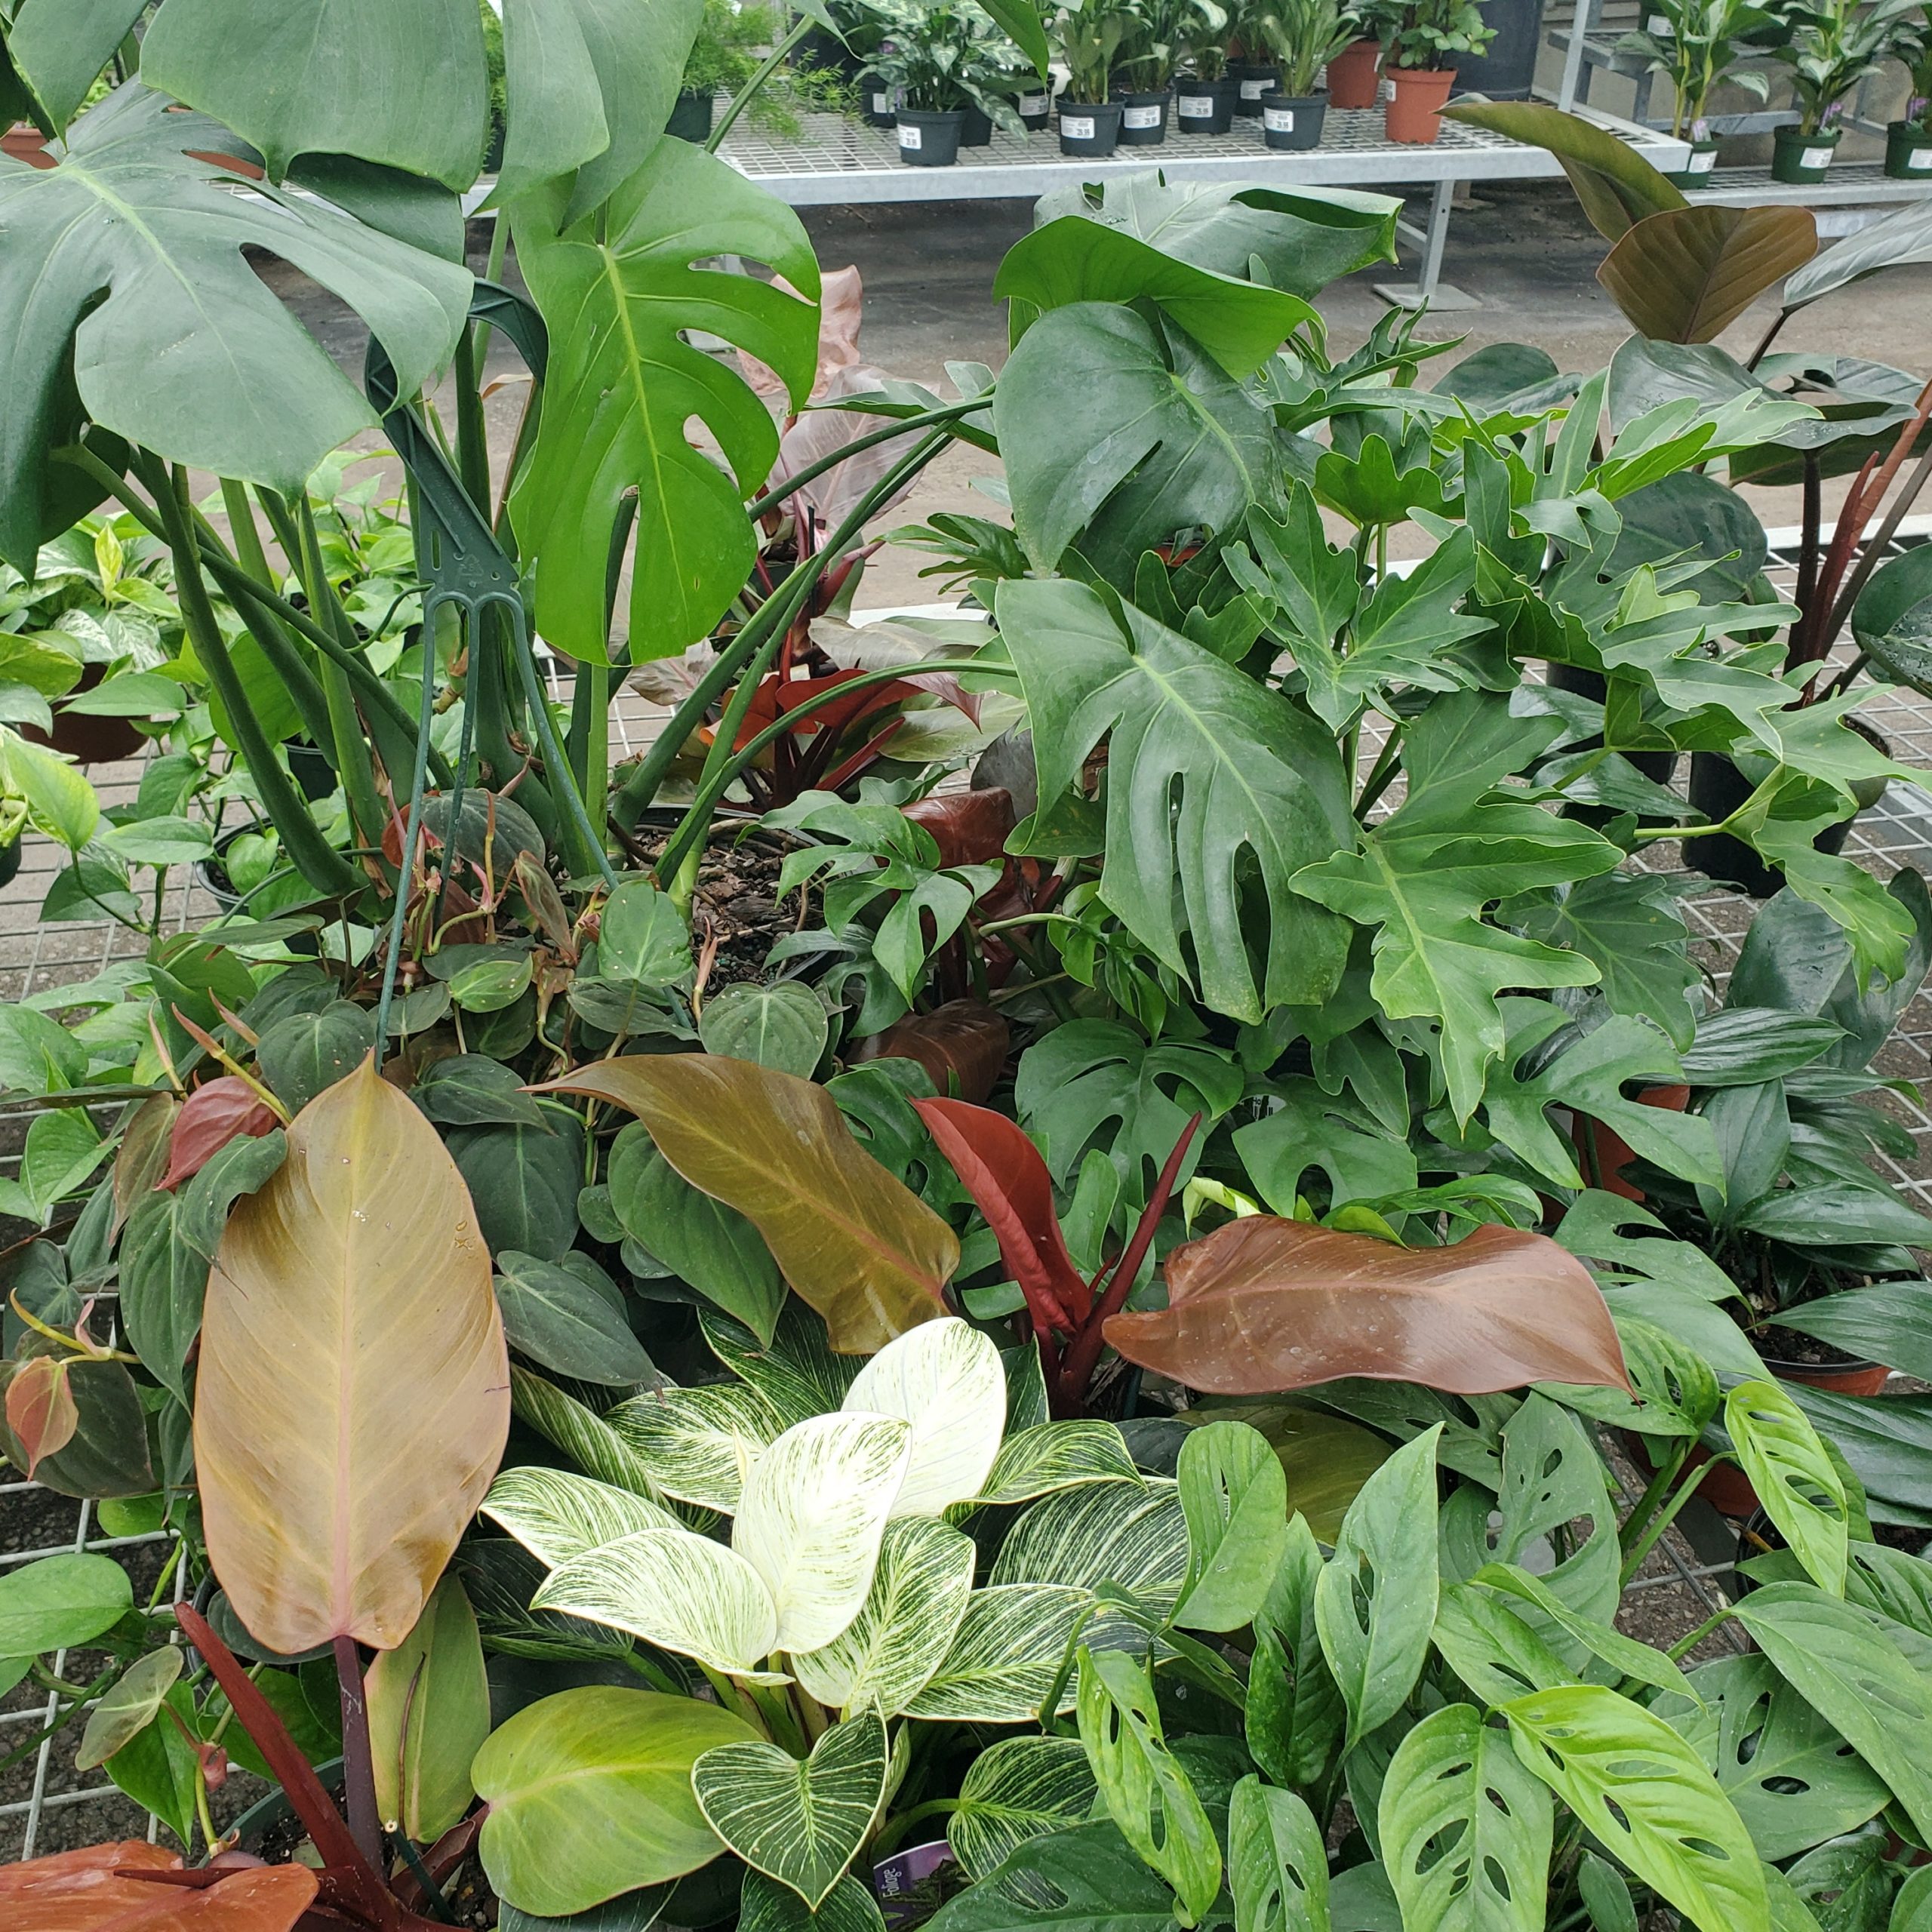 Philodendron Brasil Plant in 6 in. Grower Pot